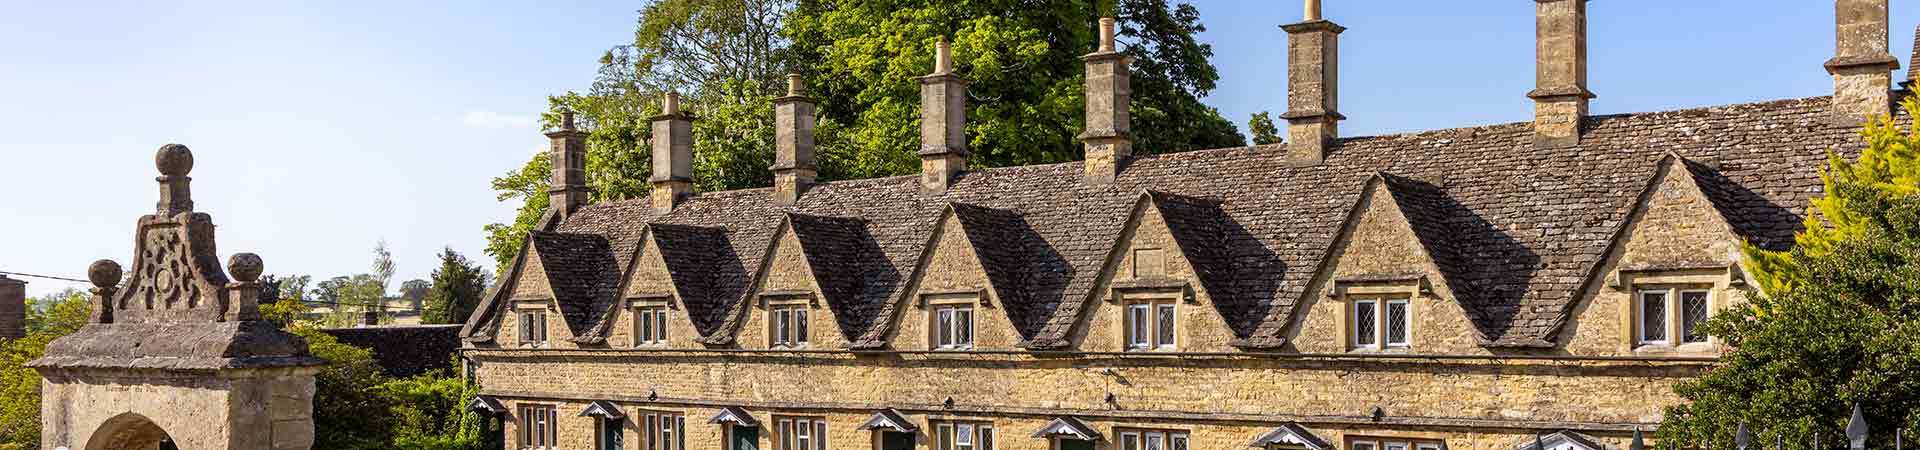 Cottages in Chipping Norton